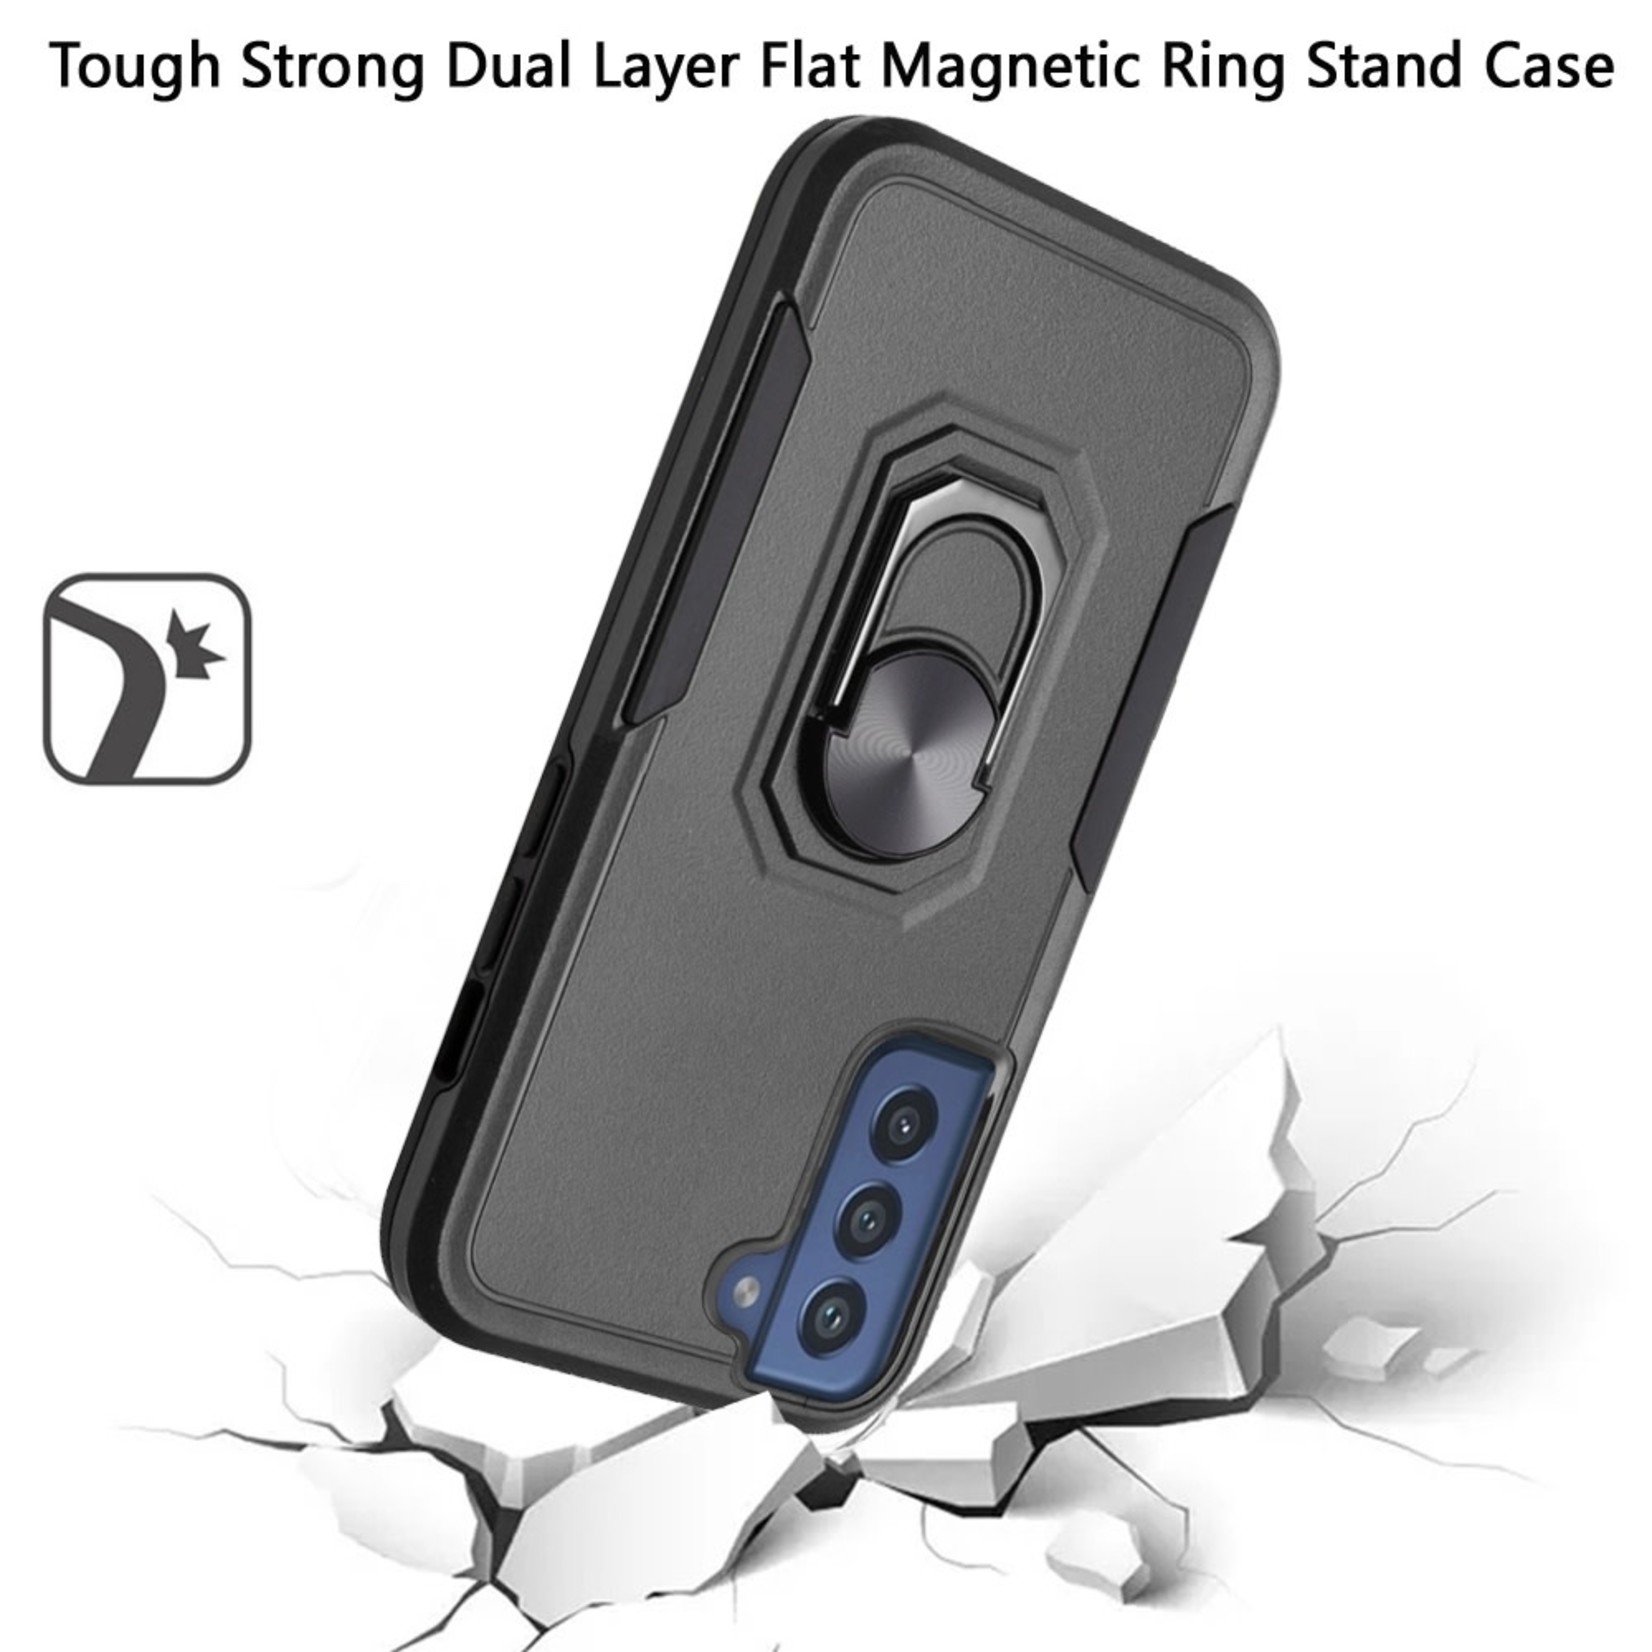 Samsung Tough Strong Dual Layer Flat Magnetic Ring Stand Case Cover - Black For Samsung Galaxy S22 Plus